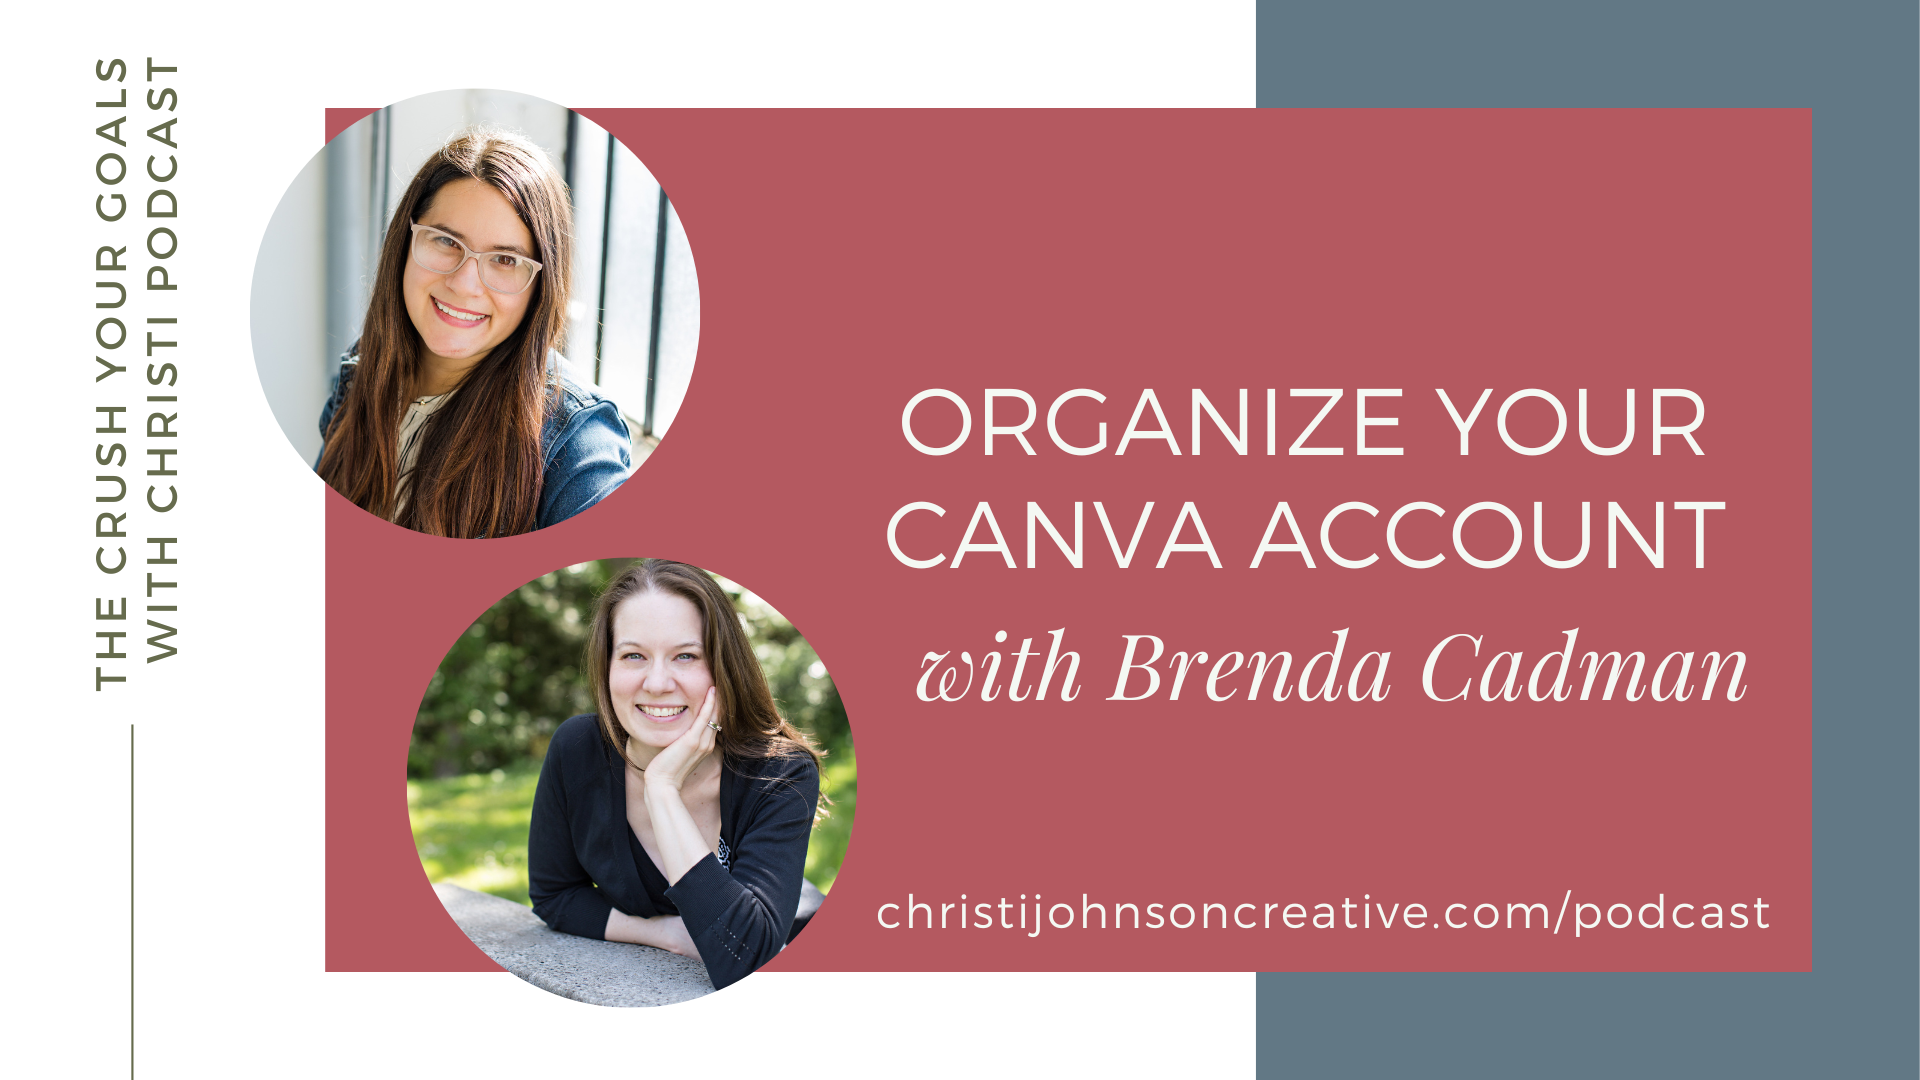 Brenda and Christi are smiling at the camera in circular frames over a pink background with white text that says "Organize Your Canva Account with Brenda Cadman"